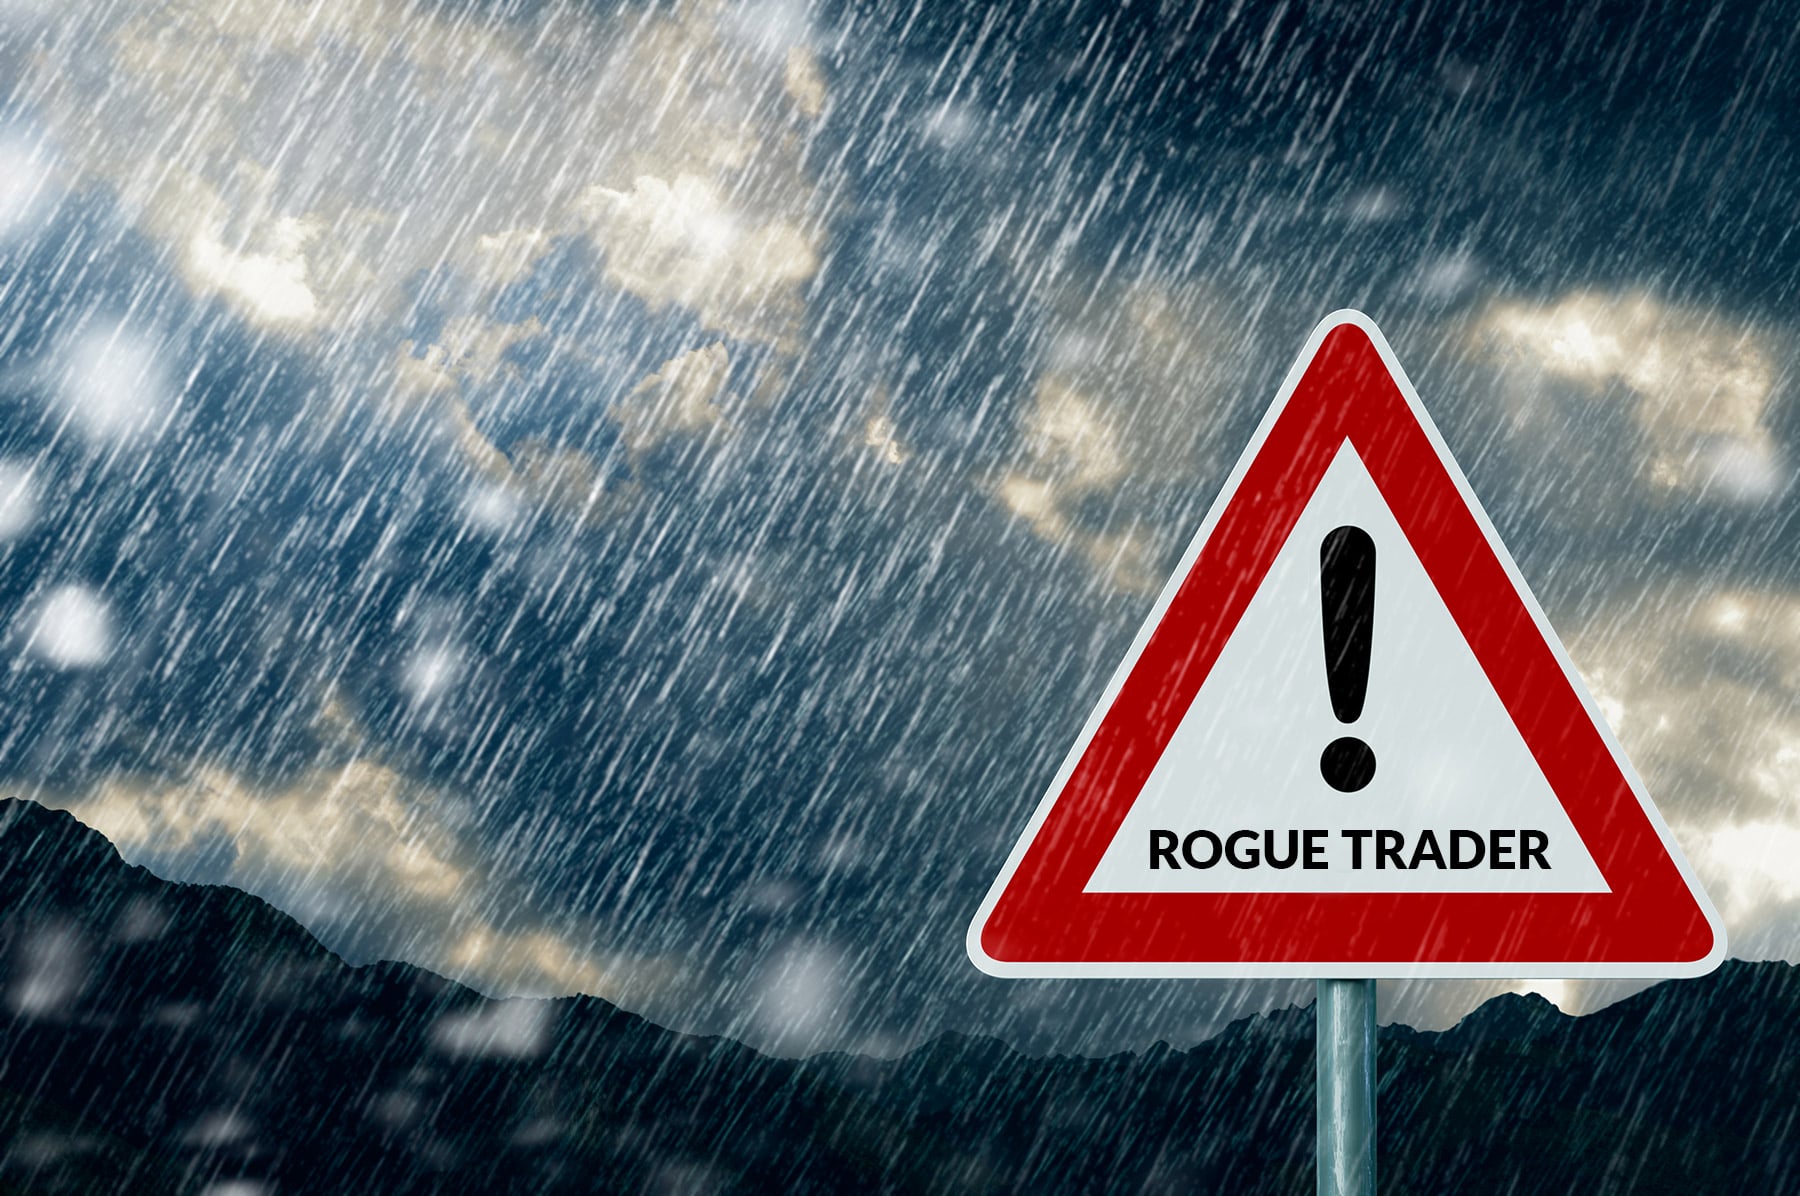 Eclipse Energy Issue Warning About Rogue Traders in Winter